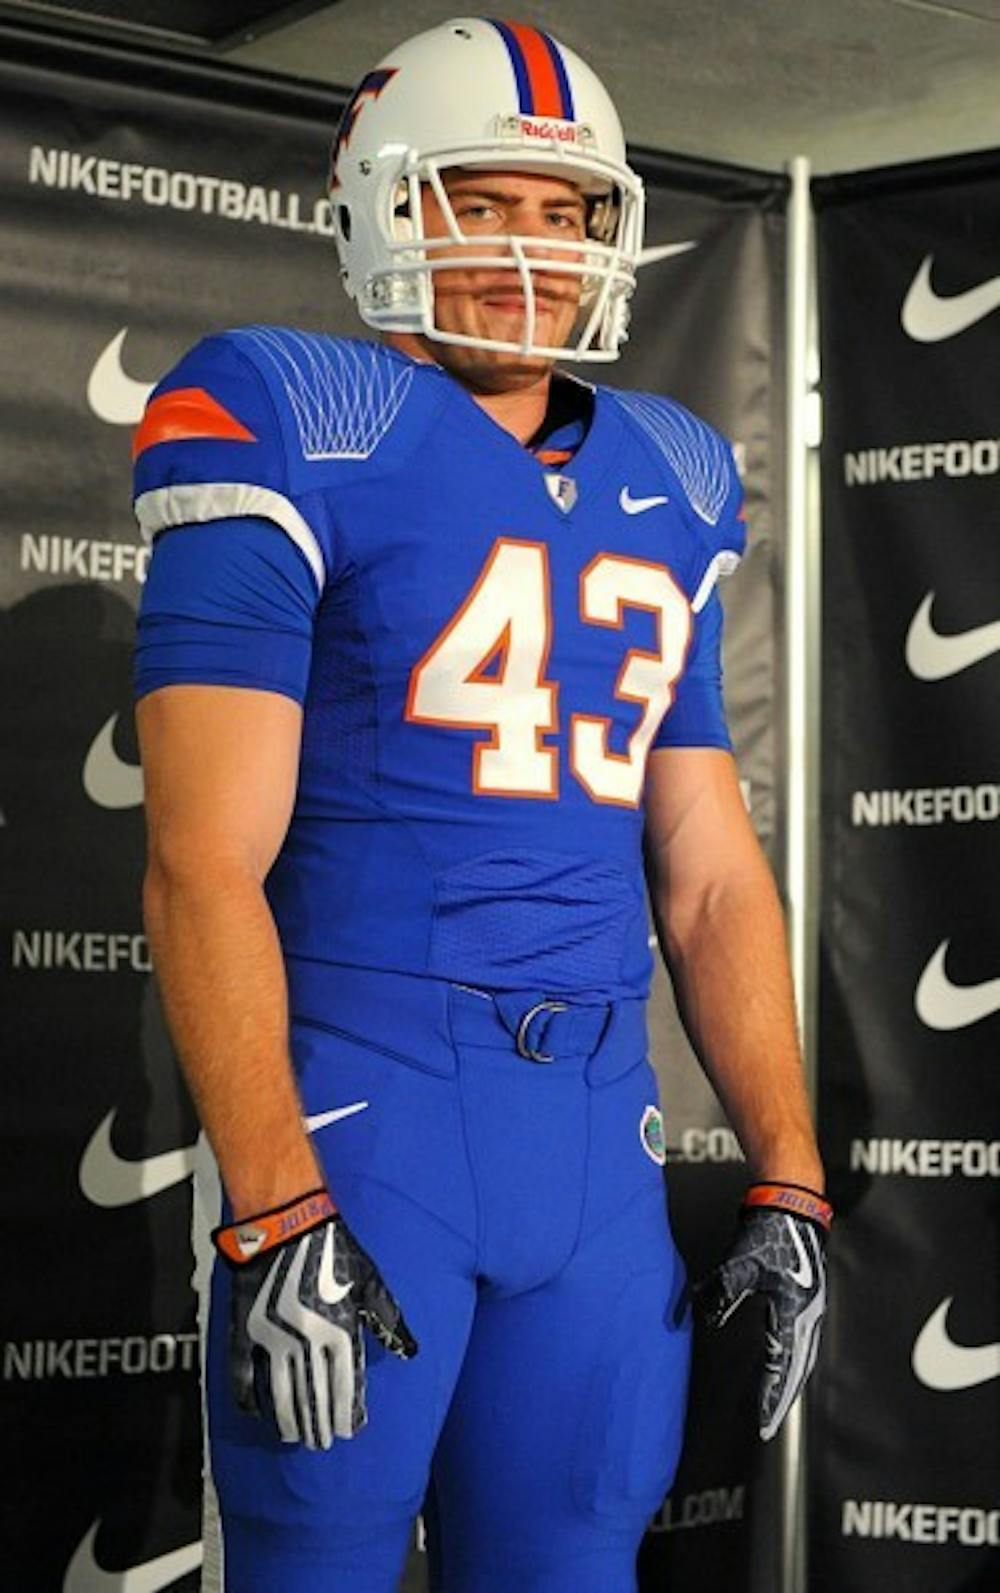 <p>Former Gator James Smith models the new Nike Pro Combat uniform at a news conference in the O’Connell Center, the Gators wore the uniforms in a 2009 game against Florida State.</p>